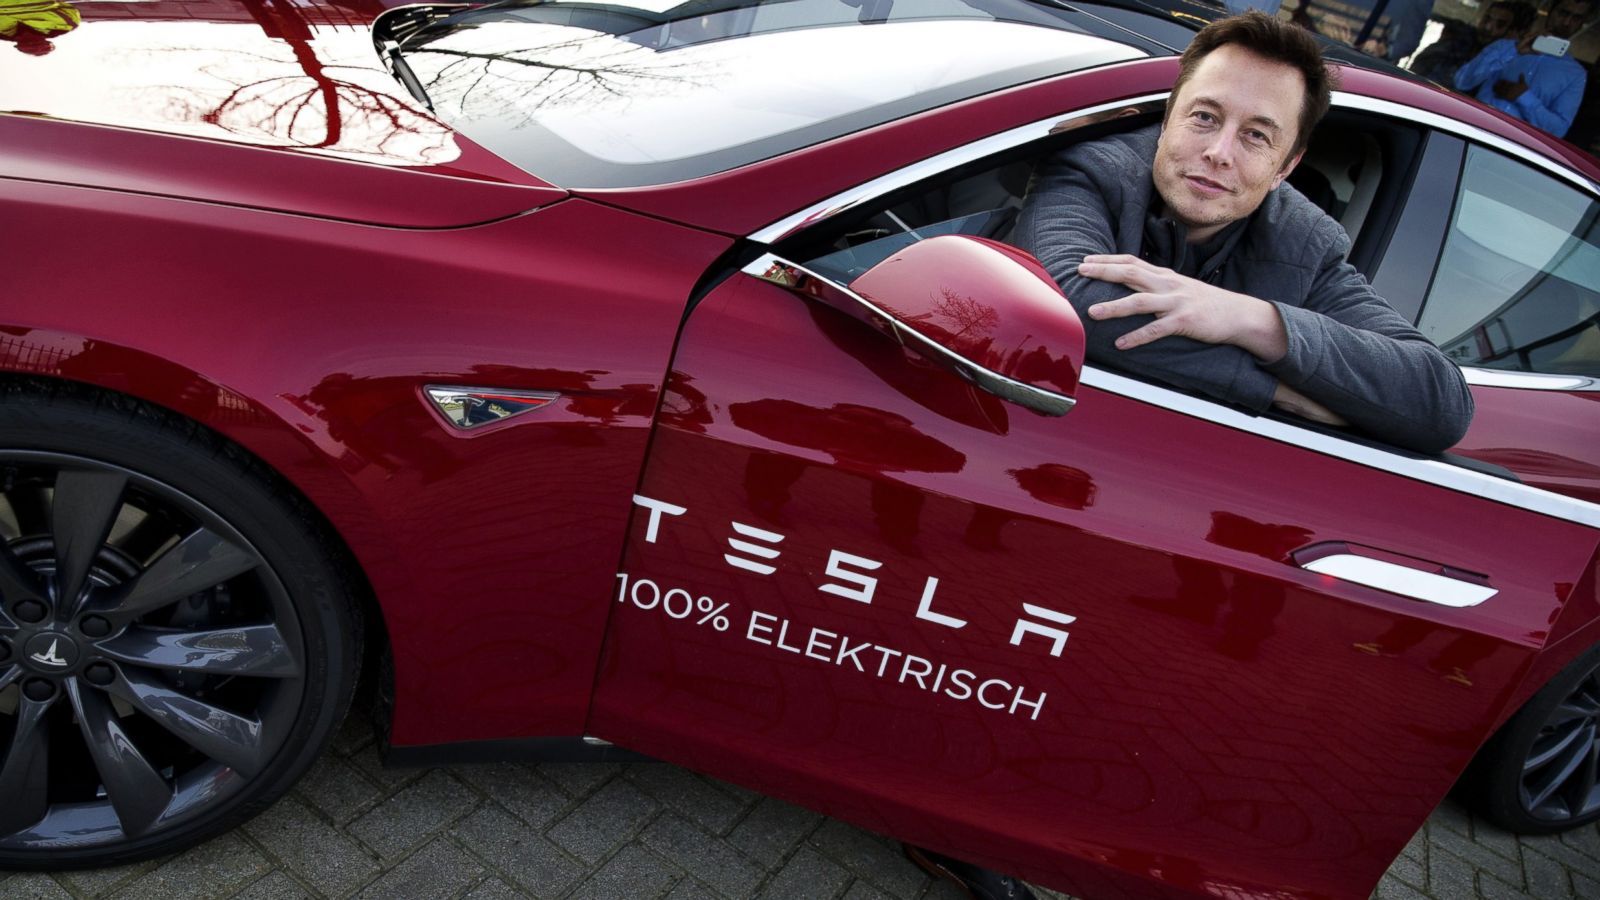 What Does Billionaire Elon Musk Have to Gain From Giving Away Tesla's Patents?